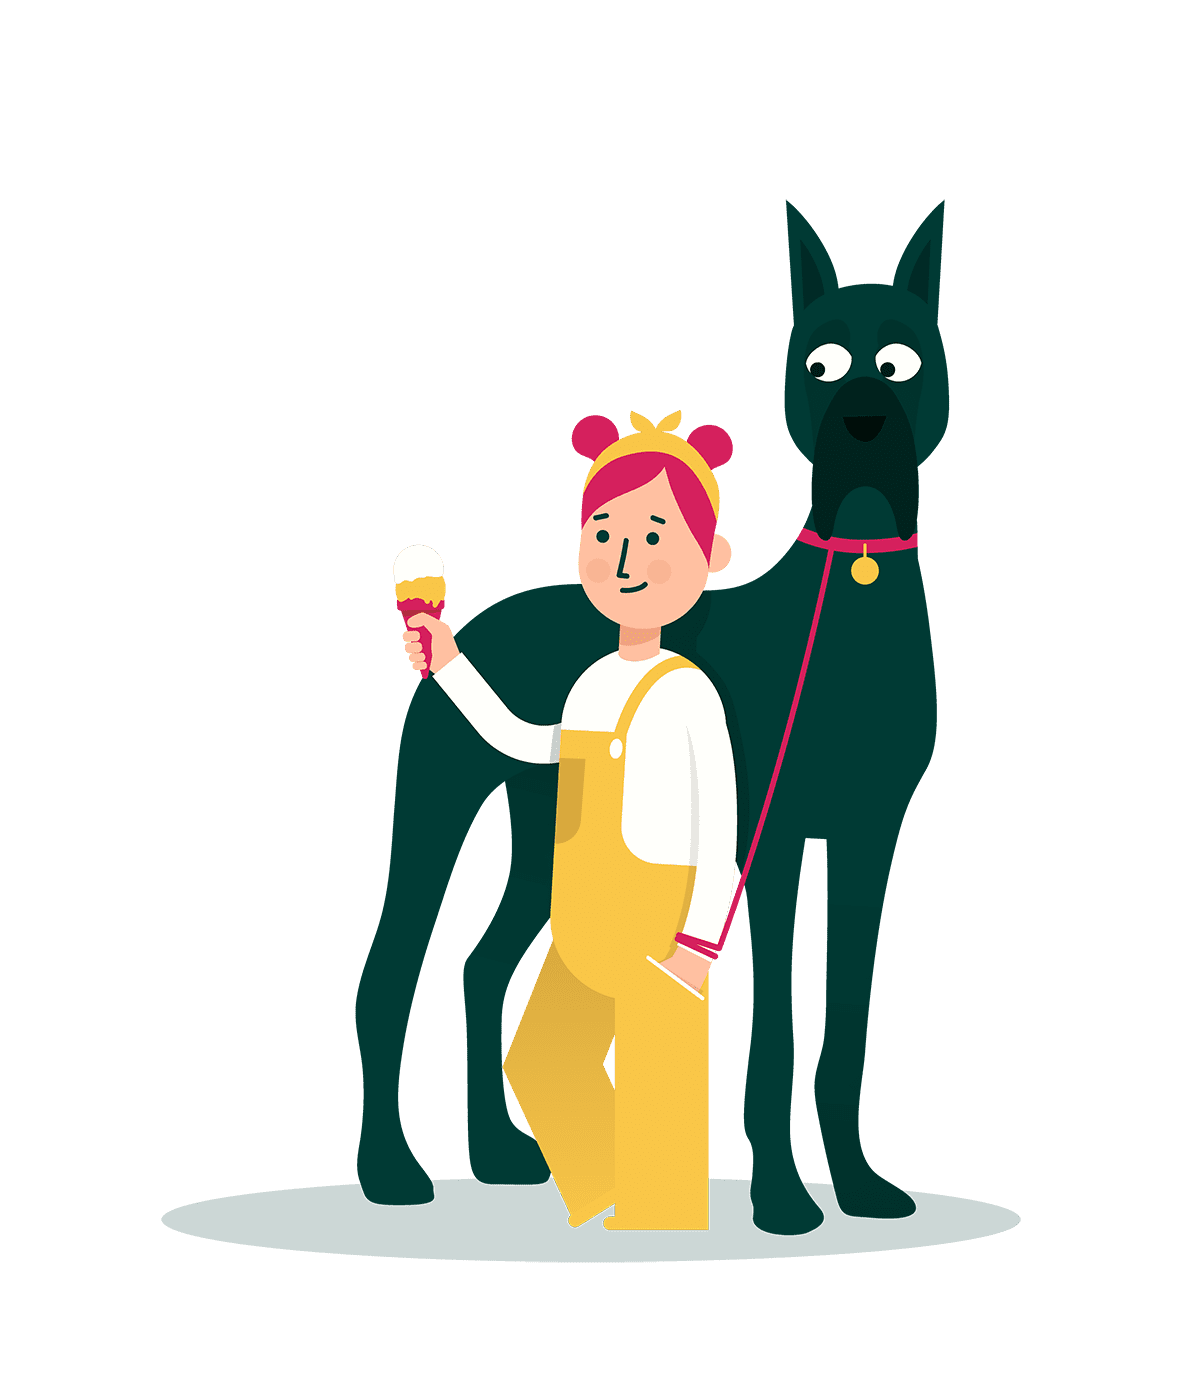 A graphic of a woman eating ice cream with a large dog.